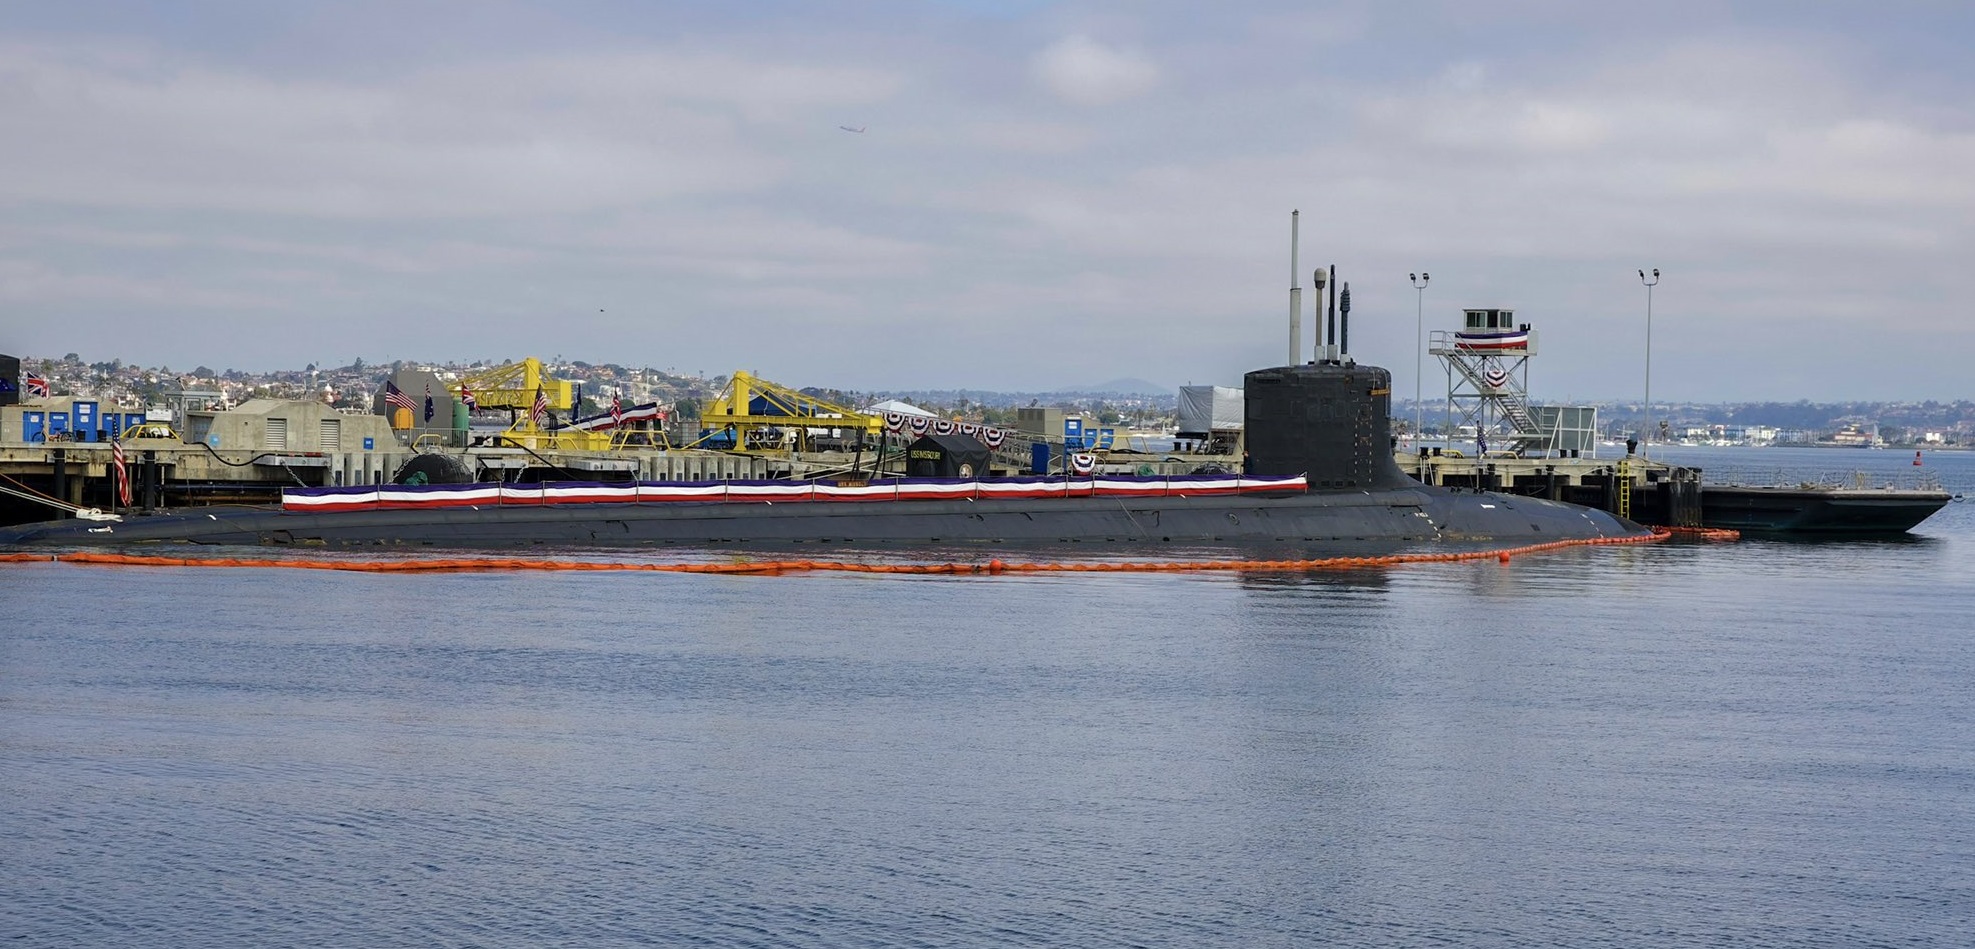 Australia will buy three Virginia nuclear-powered submarines and begin producing nuclear-powered AUKUS submarines with the UK and the US - a new project worth $245bn